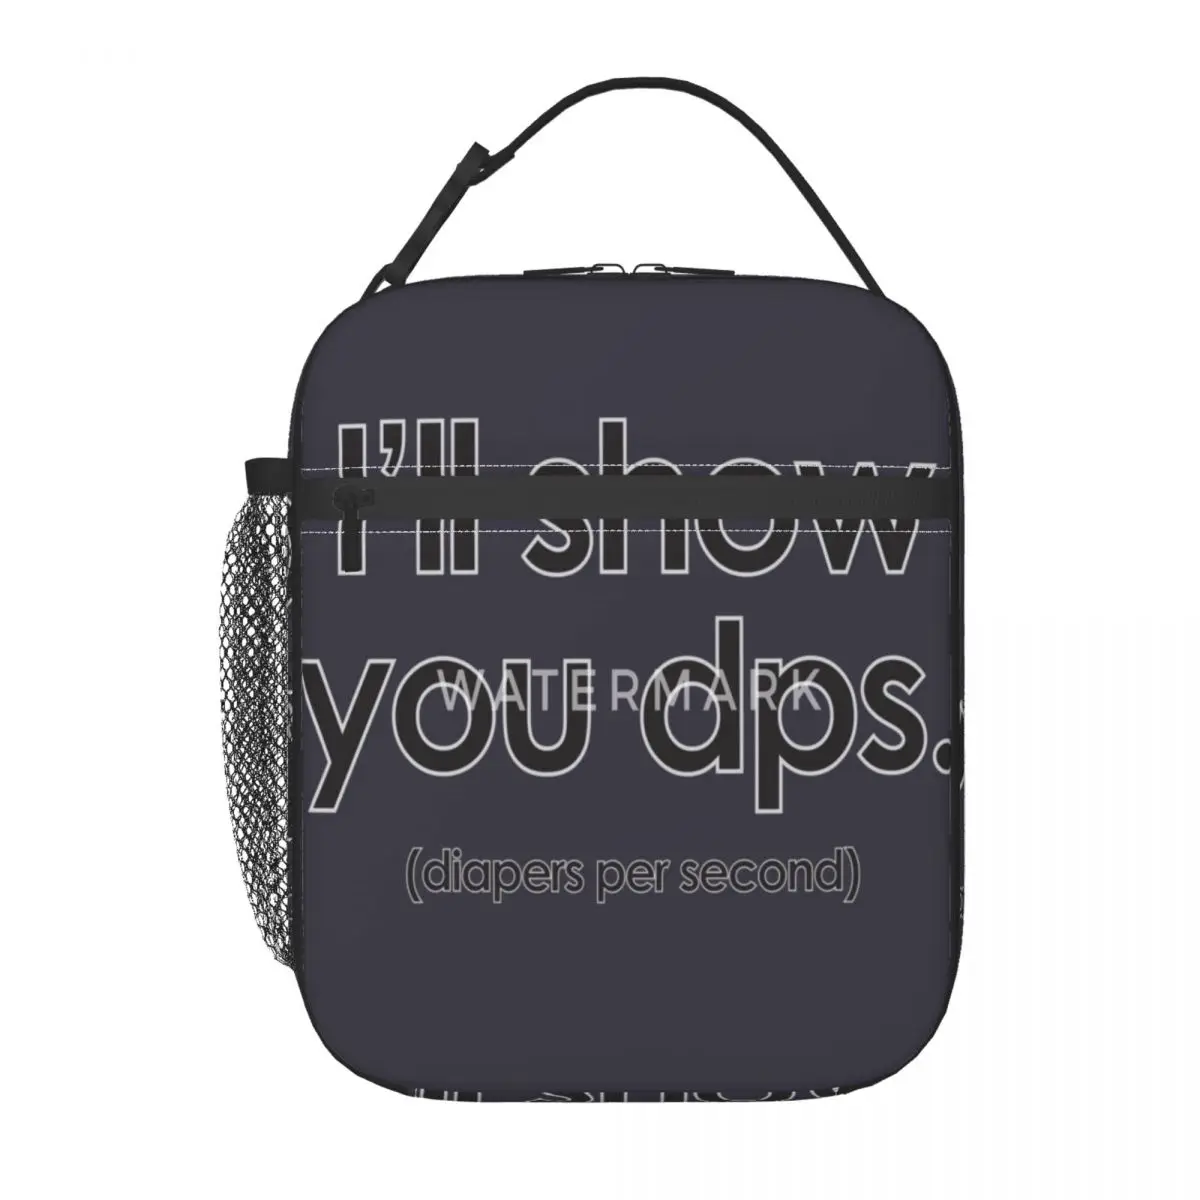 

Warcraft Baby I'll Show You DPS Diapers-per-Second Insulated Lunch BagModern Portable Office Birthday Gift Multi-Style